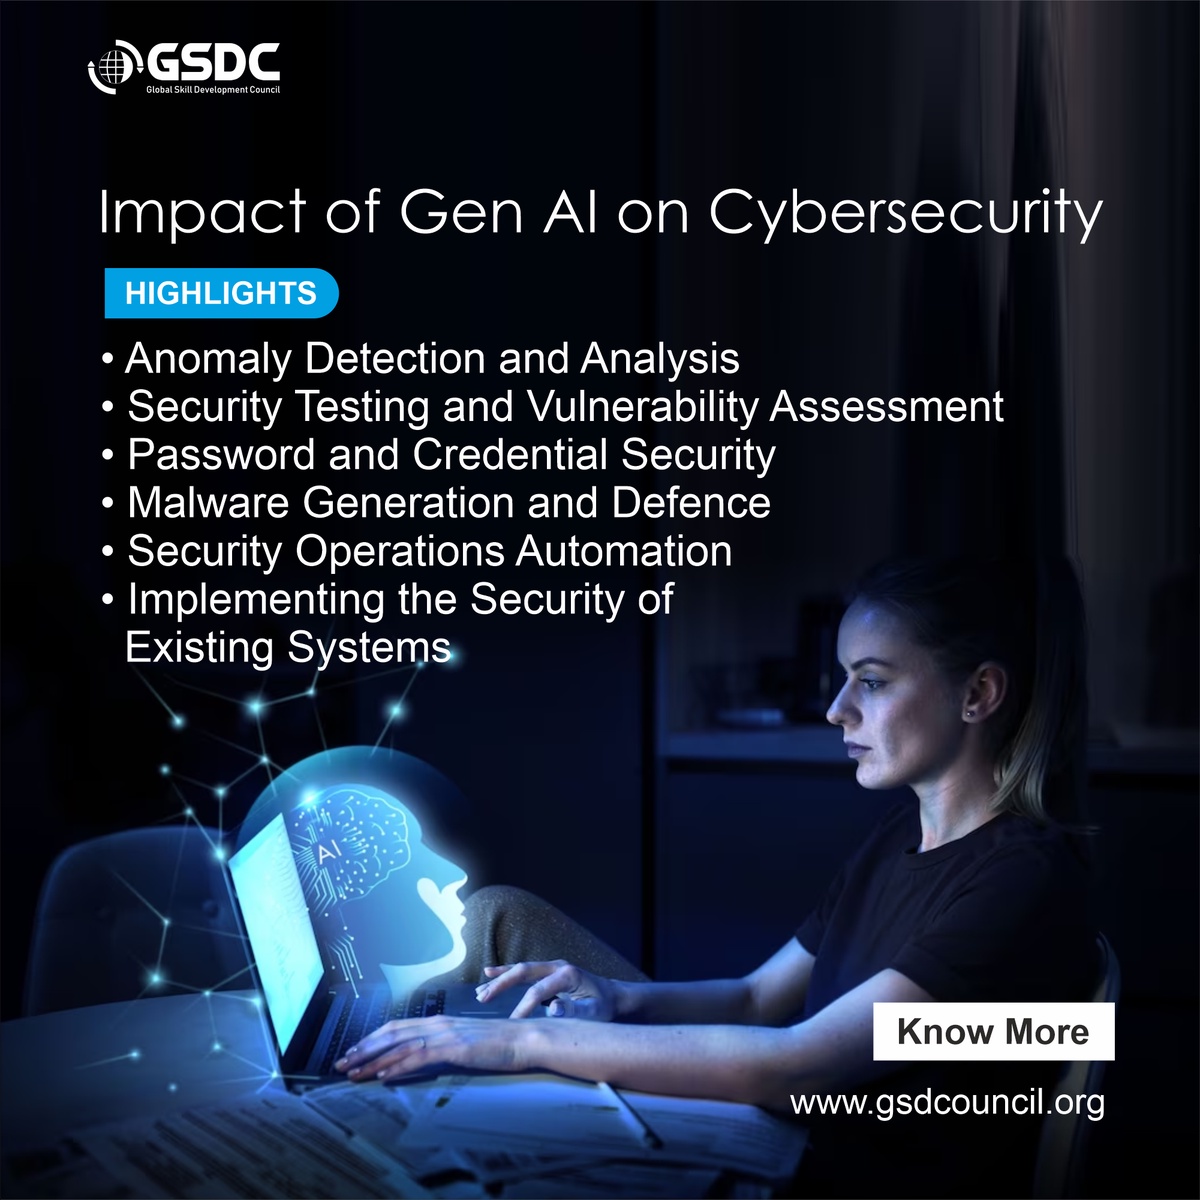 Impact of Gen AI on Cybersecurity